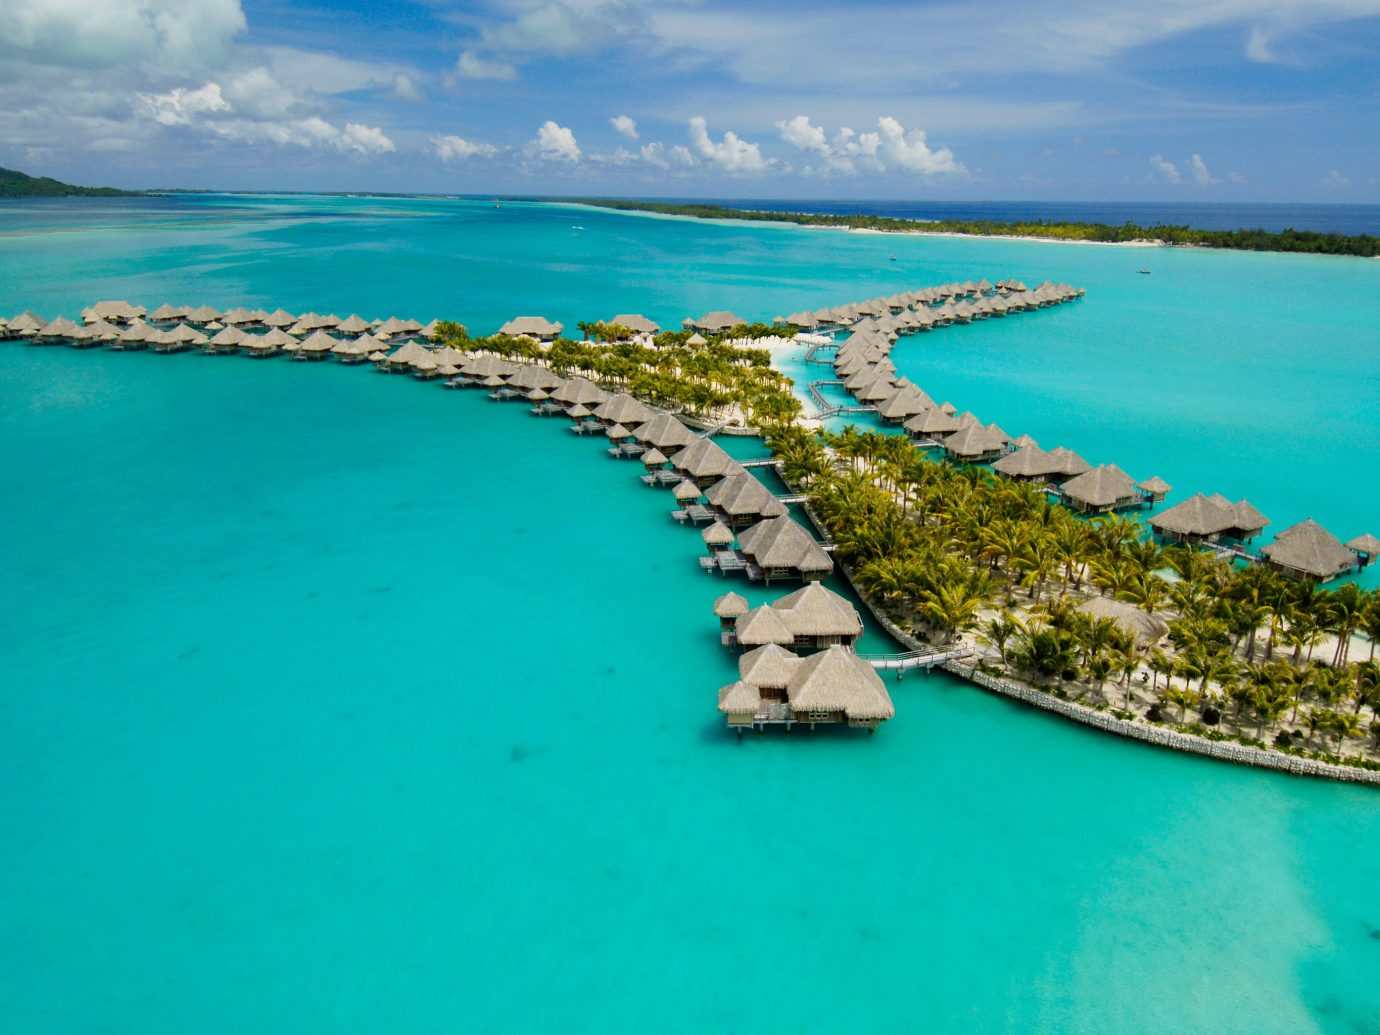 All-Inclusive Resorts Beach Boutique Hotels Hotels Island Overwater Bungalow Romance Scenic views Tropical water sky outdoor archipelago geographical feature Boat landform Ocean Sea caribbean Nature reef Coast islet bay vacation Lagoon aerial photography atoll cape inlet cay cove blue swimming shore